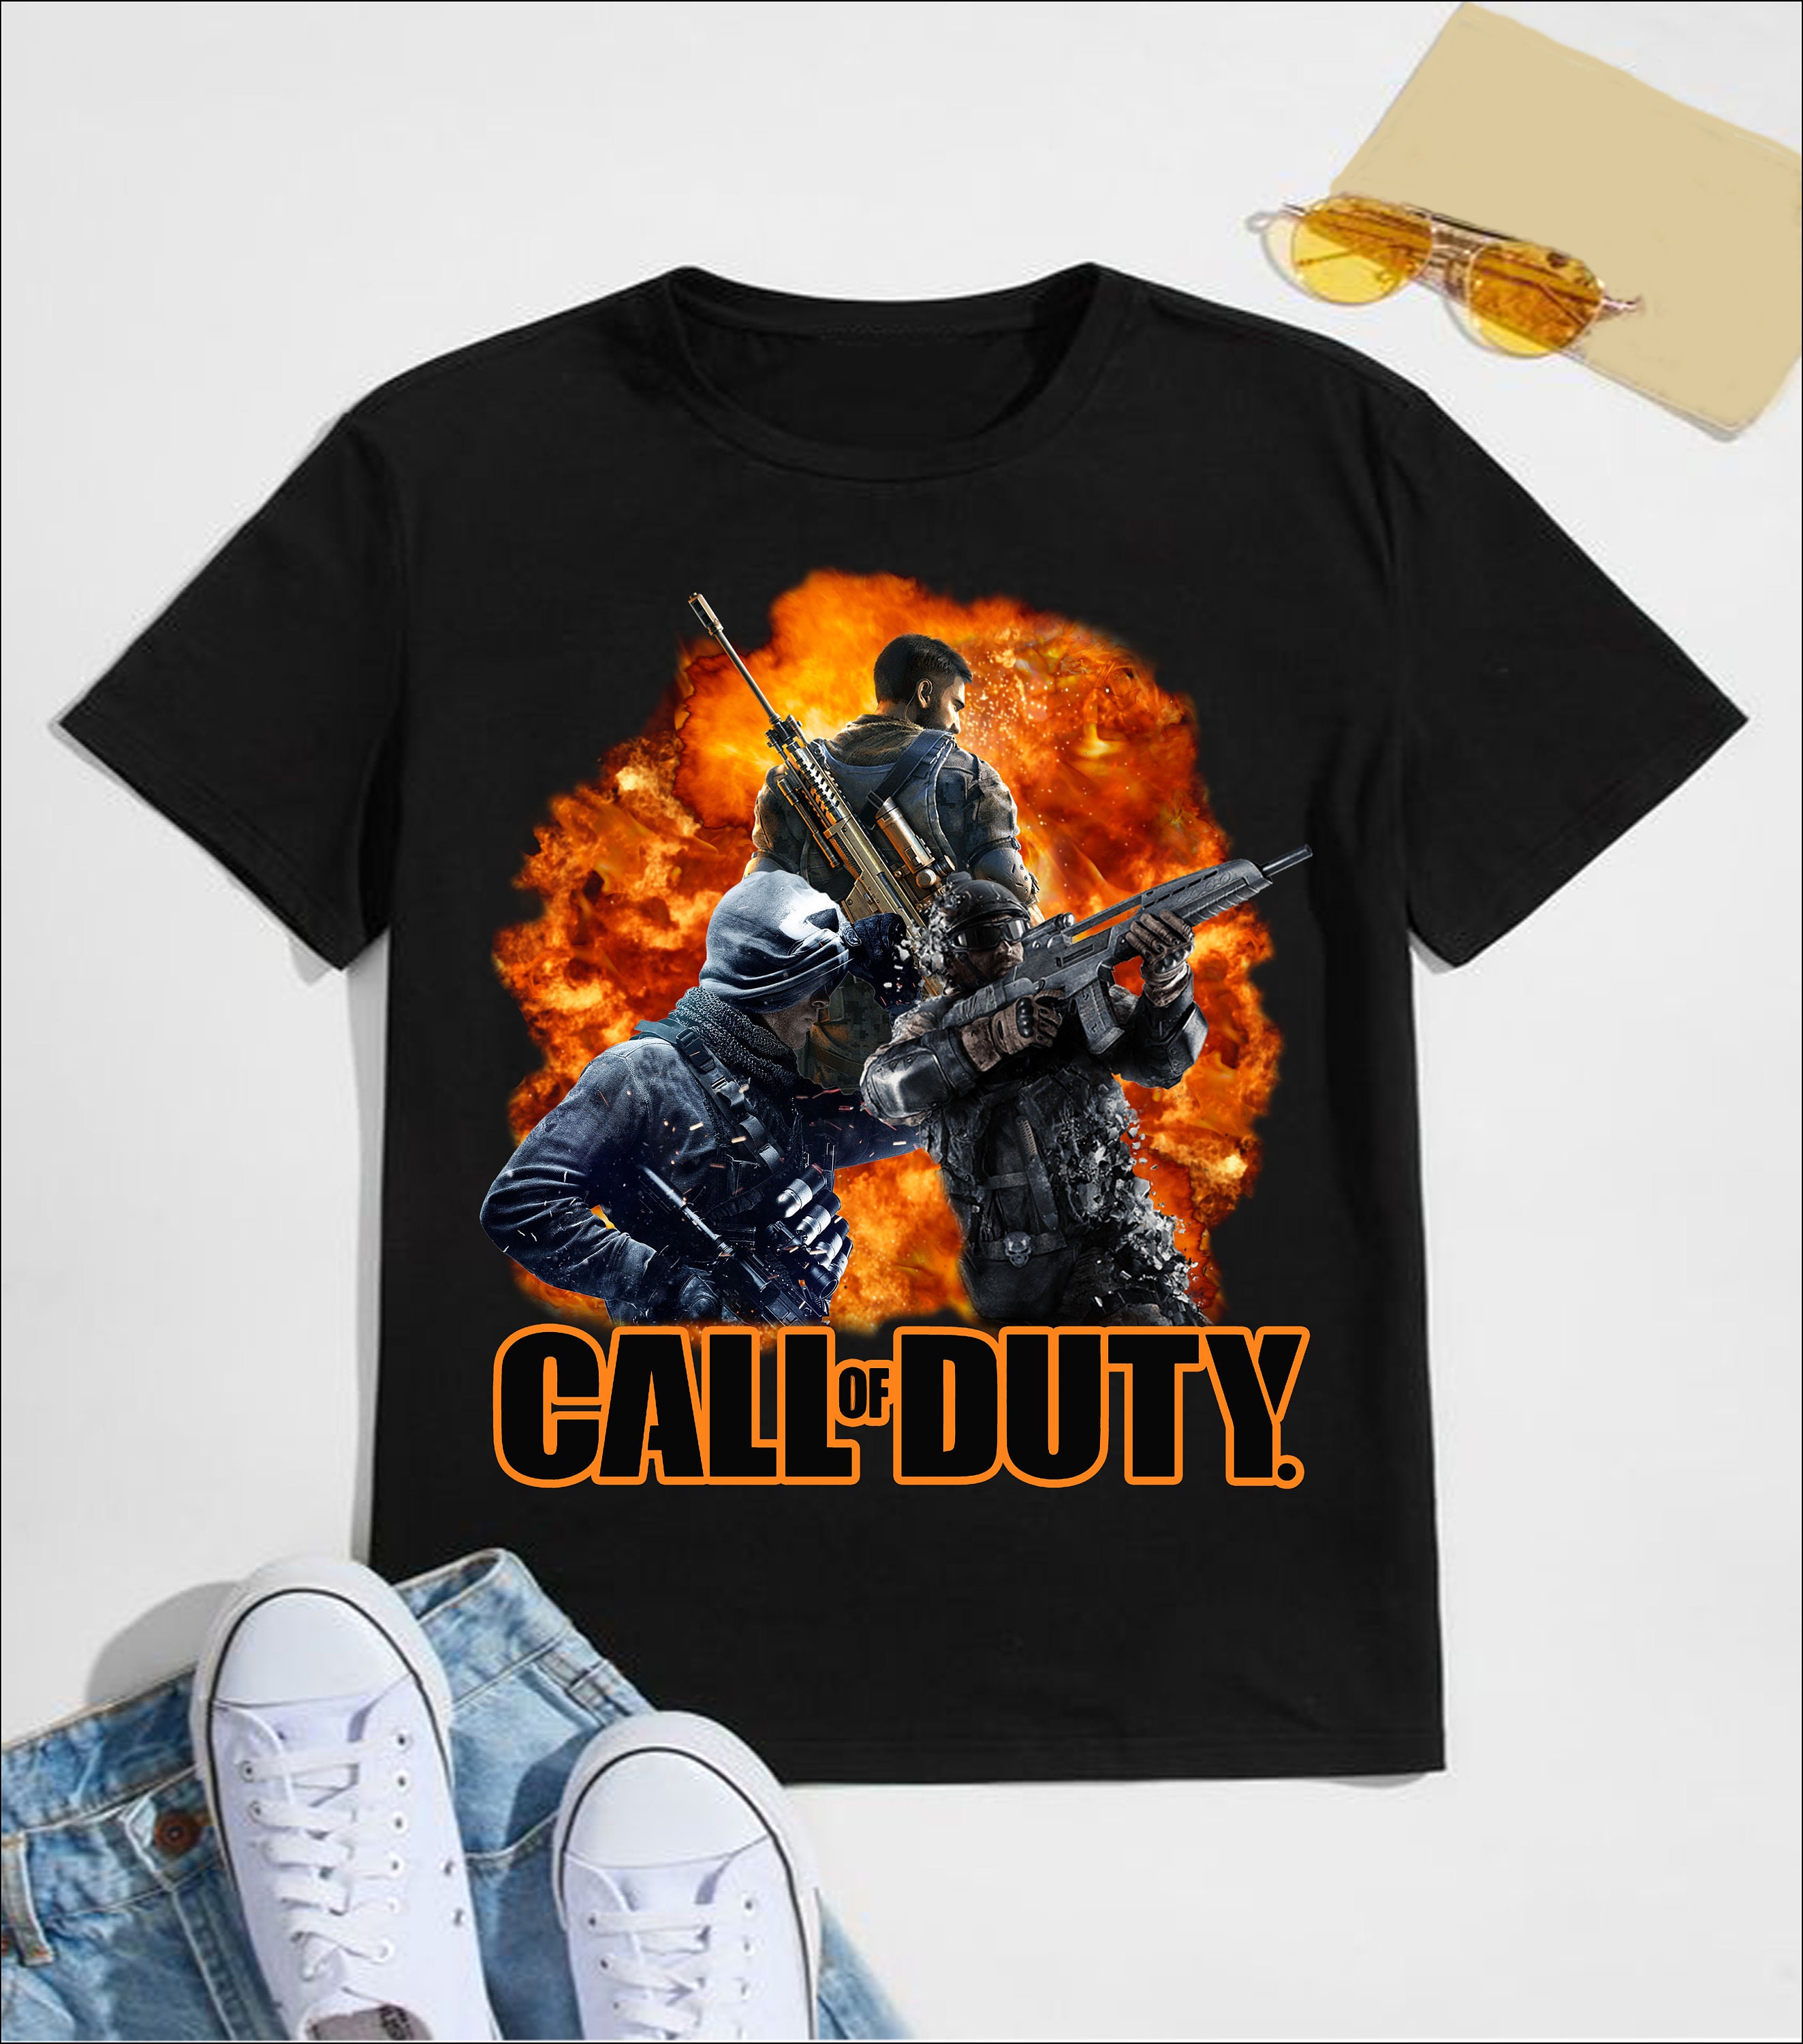 Call of Duty T Shirt Design PNG Instant Download 300dpi Png - Etsy